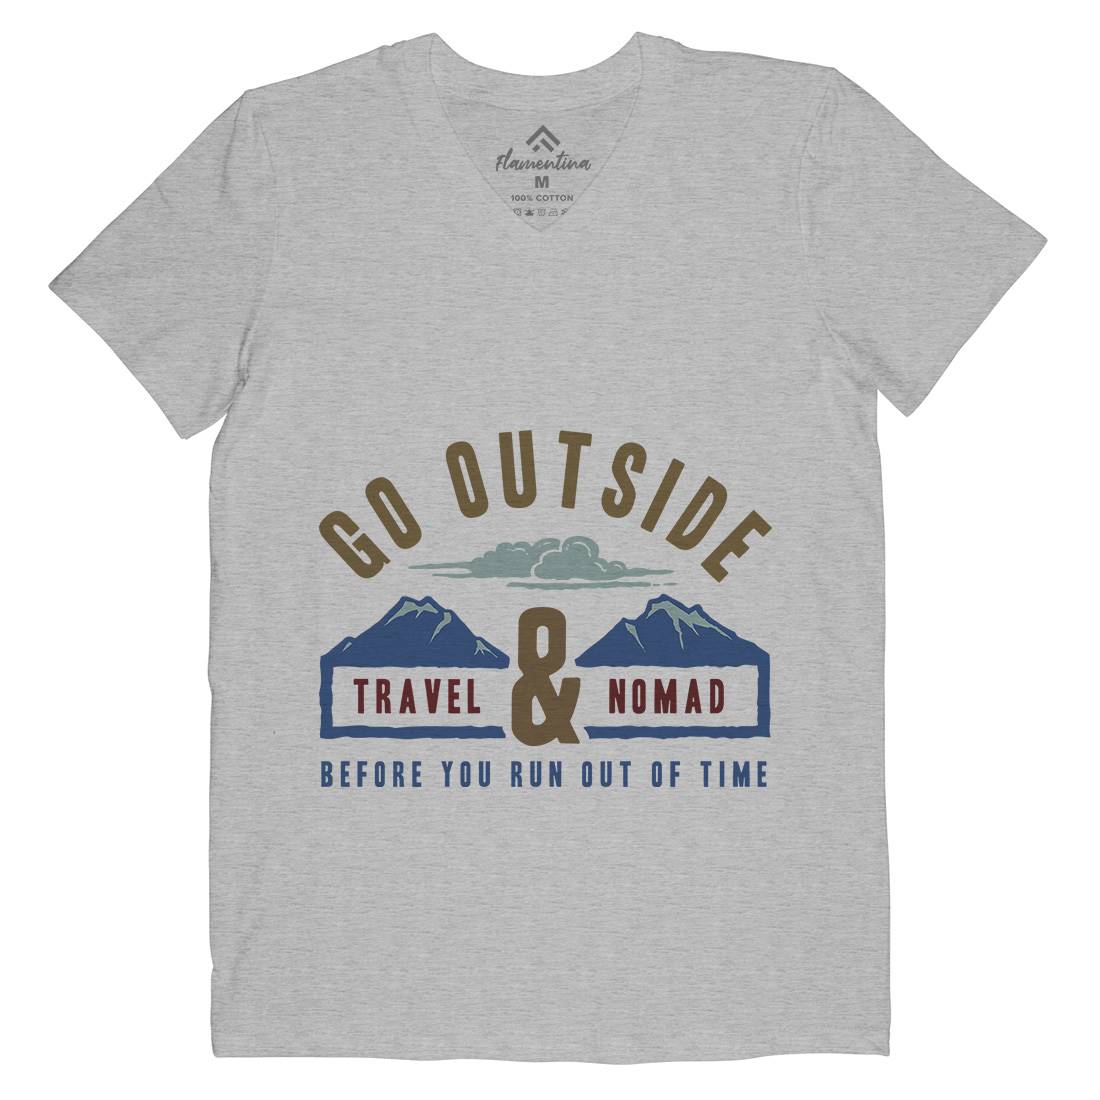 Travel And Nomad Mens Organic V-Neck T-Shirt Nature A388